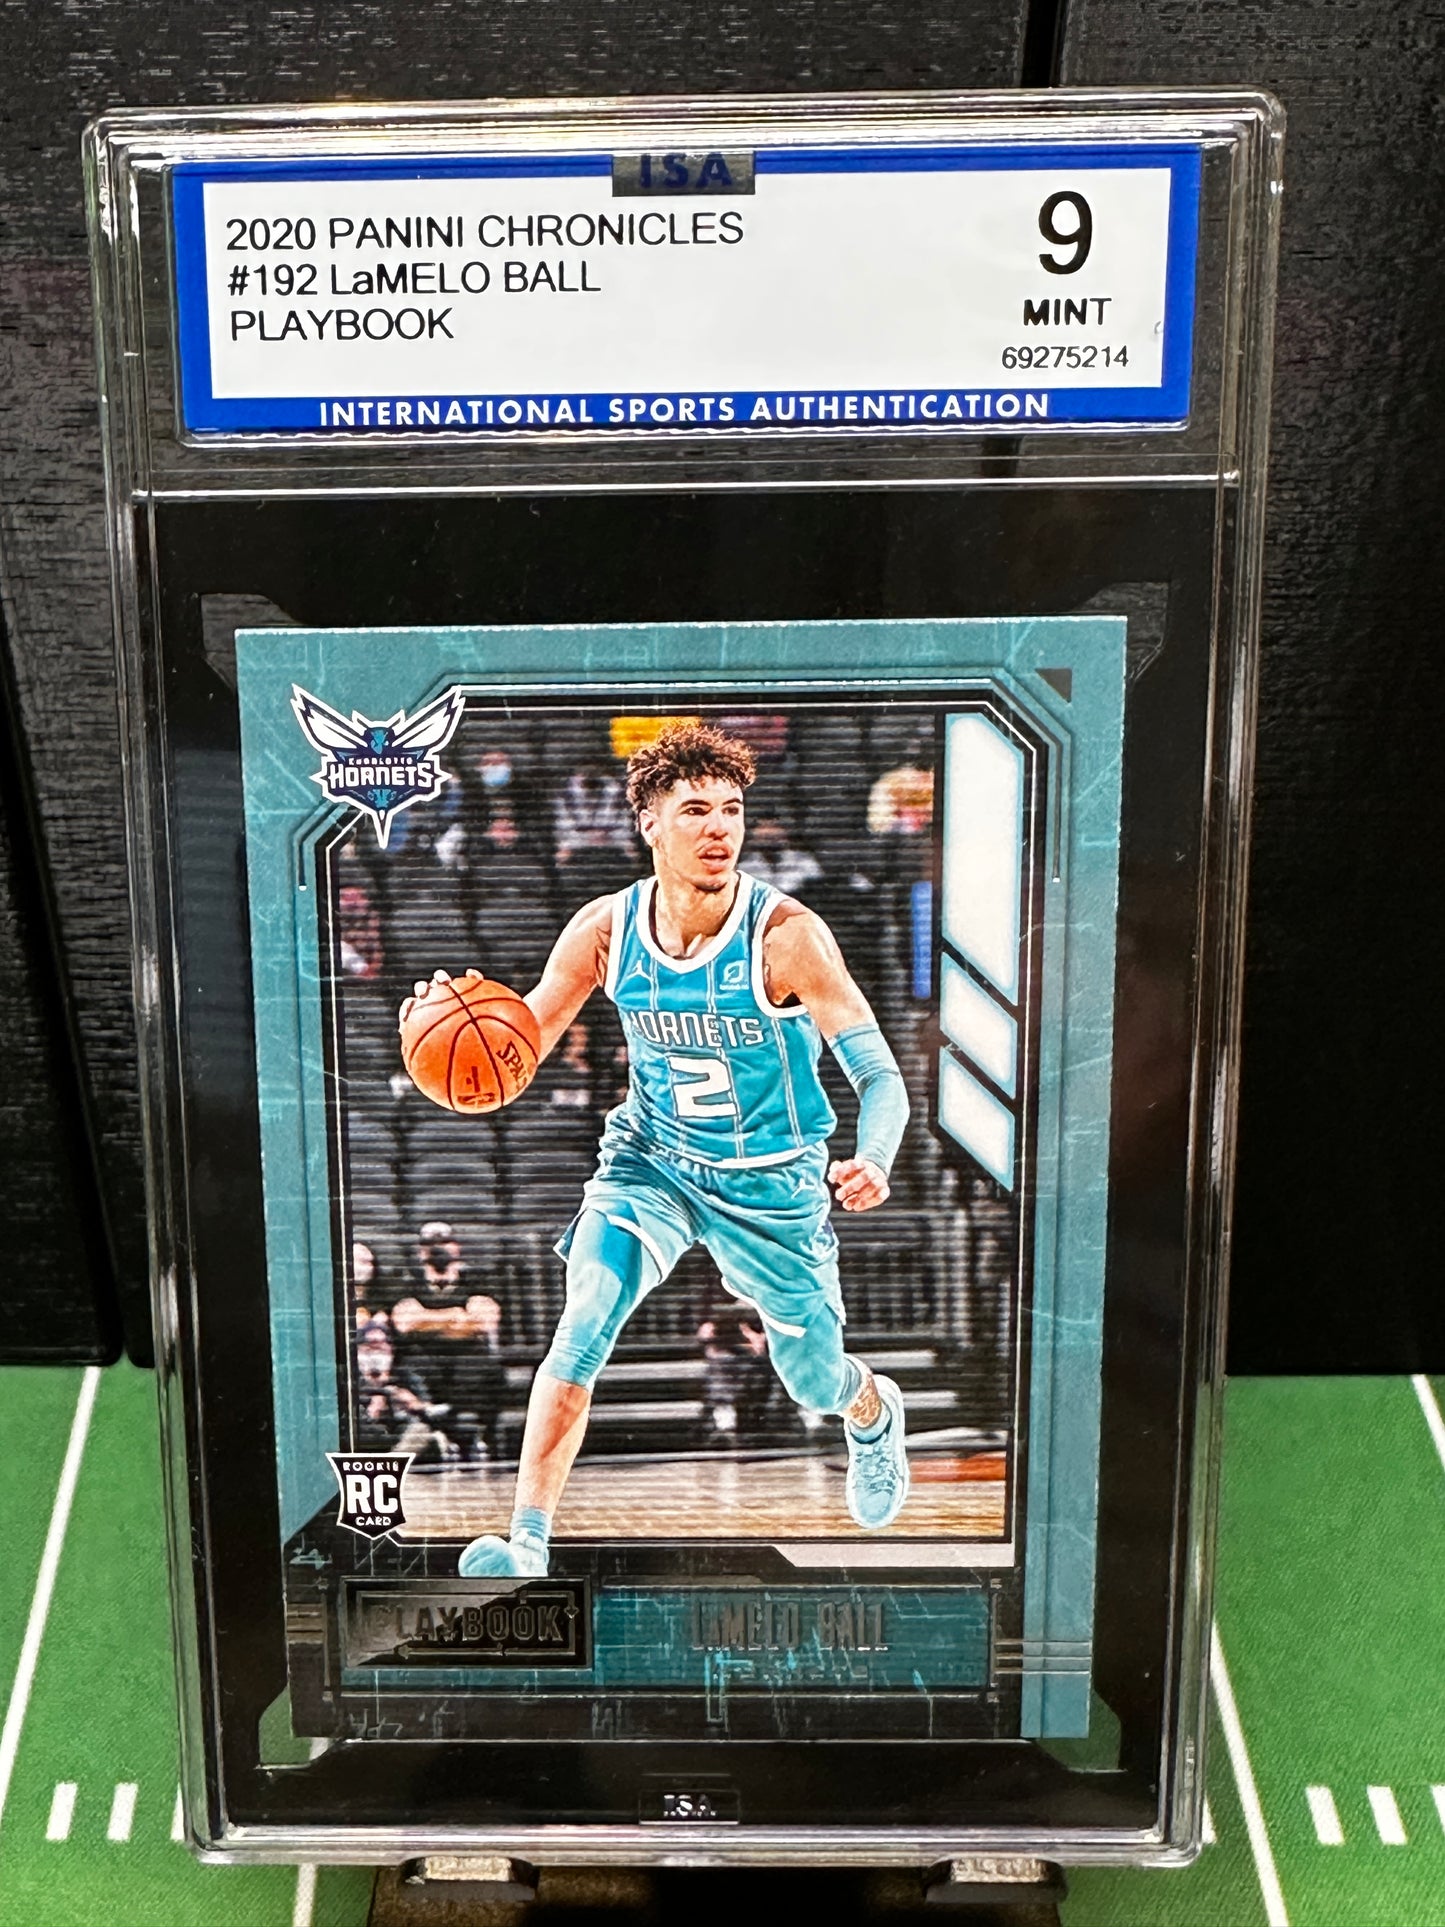 2020-21 Panini Chronicles #192 LaMelo Ball Playbook Charlotte Hornets RC Rookie ISA 9